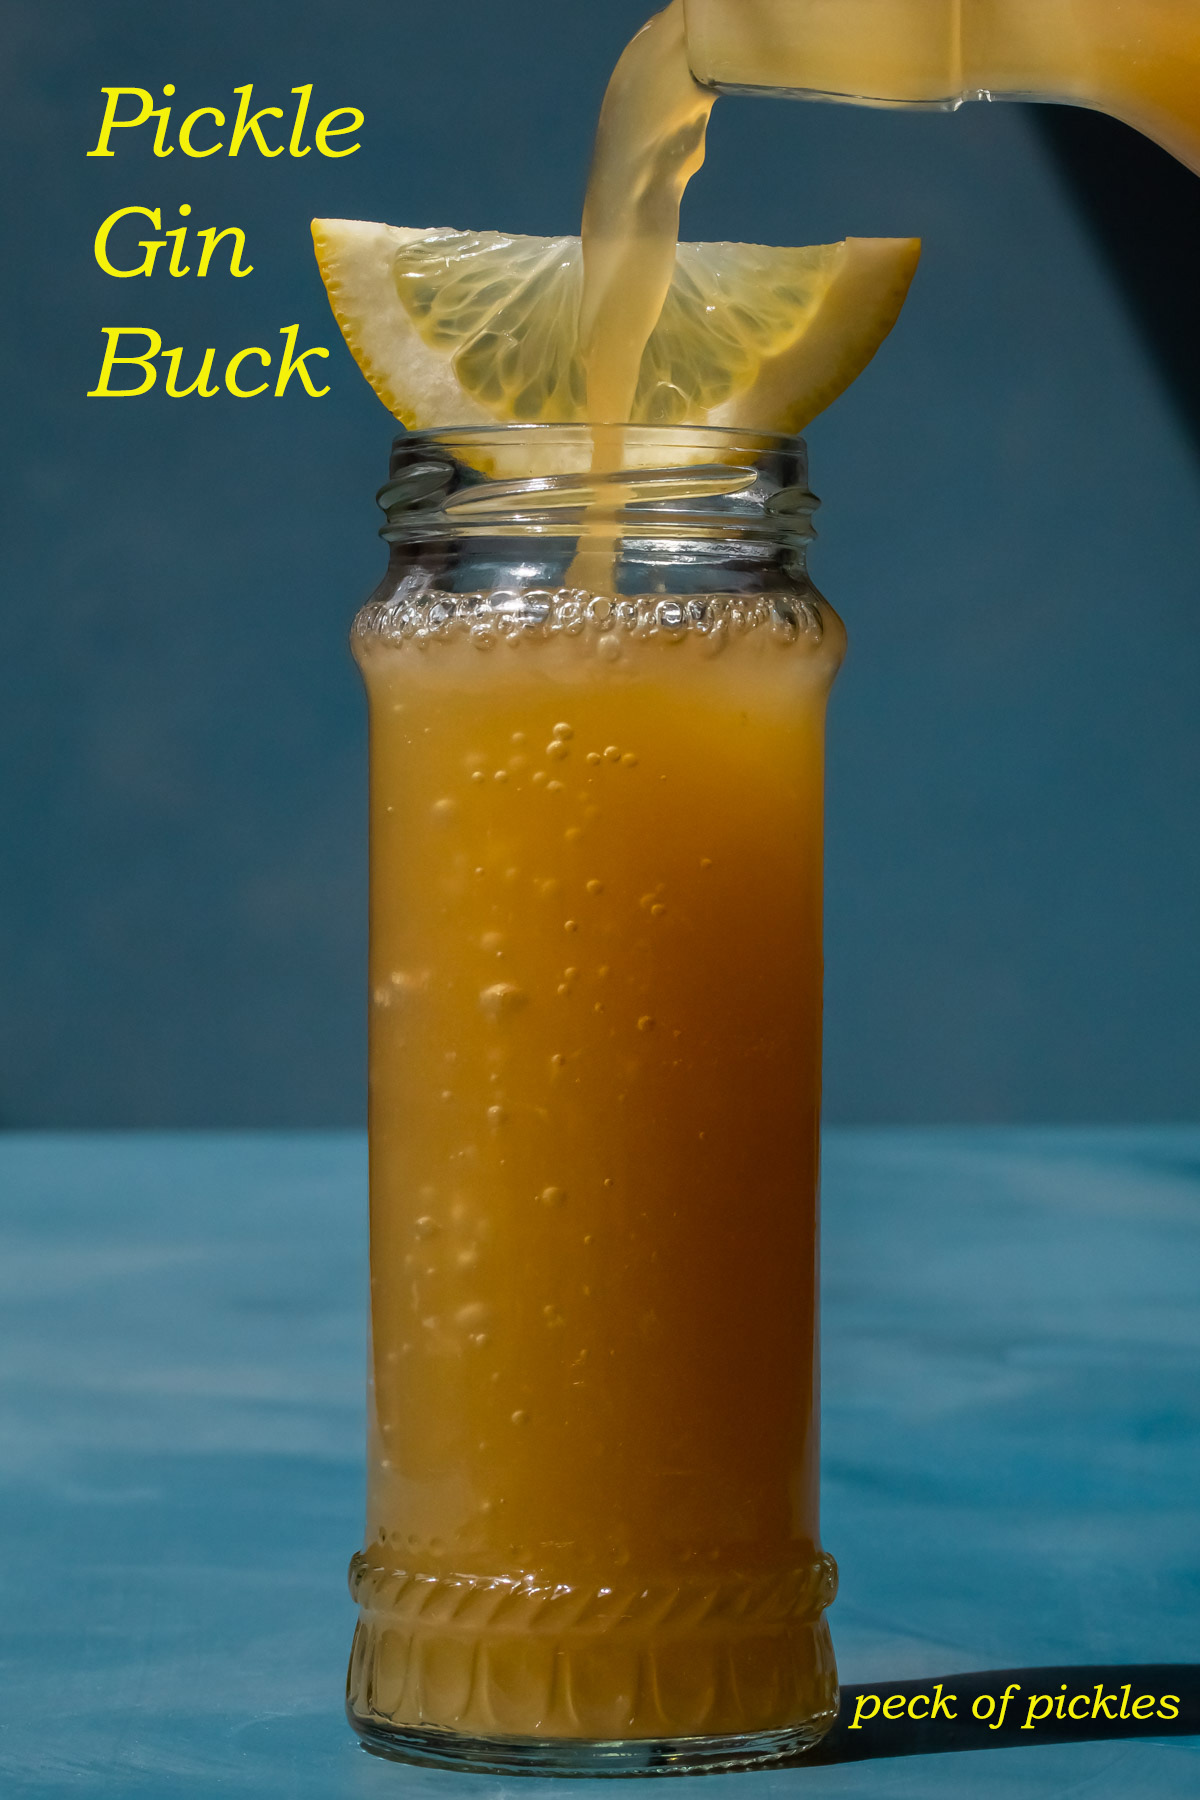 pouring ginger beer for a Pickle Gin Buck Cocktail